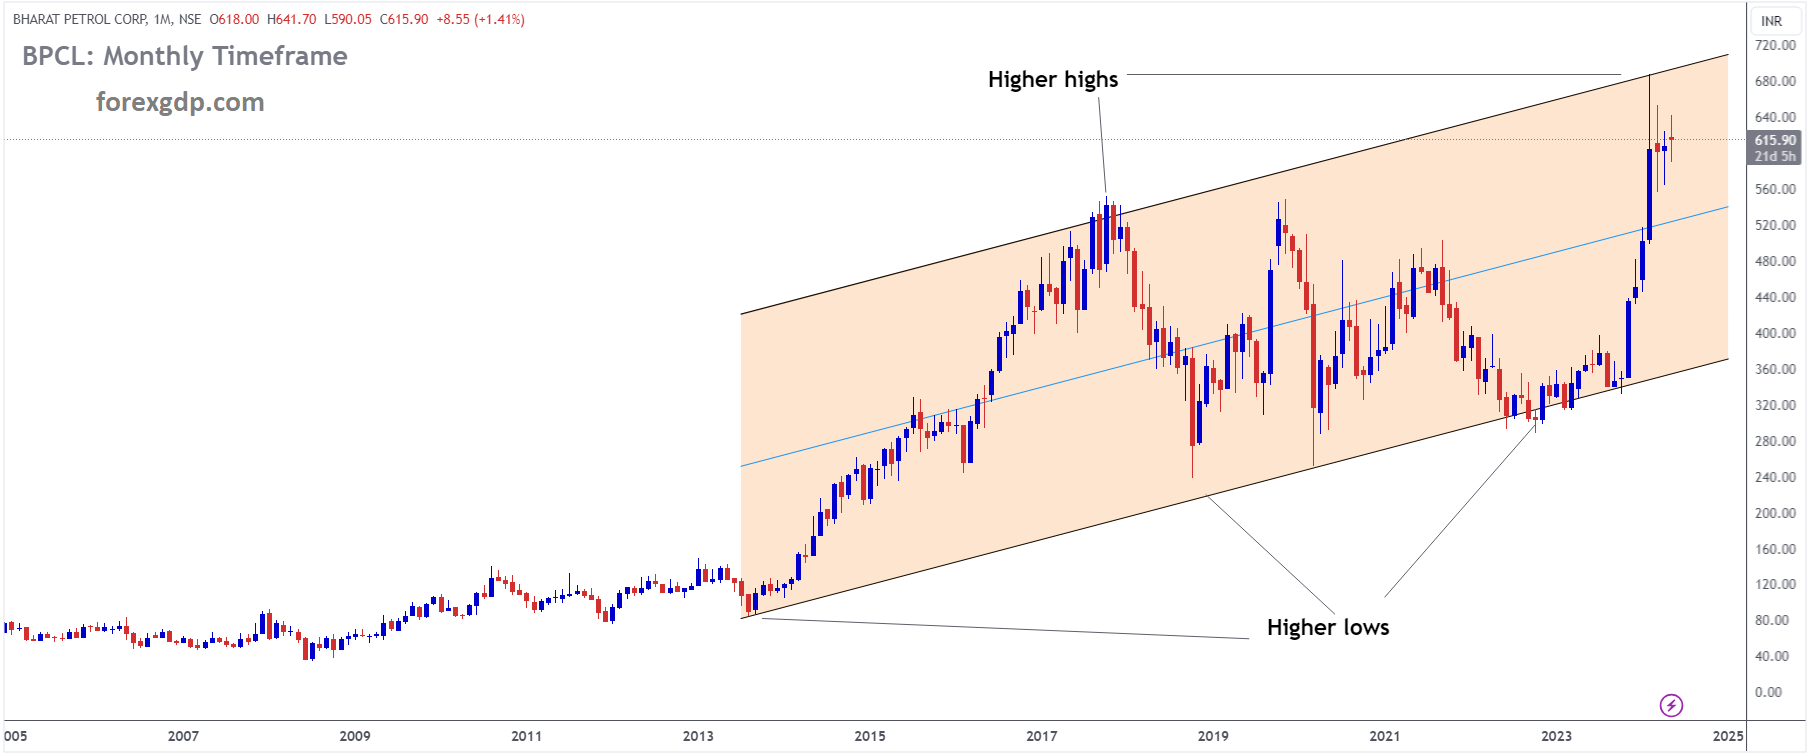 BPCL PETROL CORP Market Price is moving in Ascending channel and market has reached higher high area of the channel